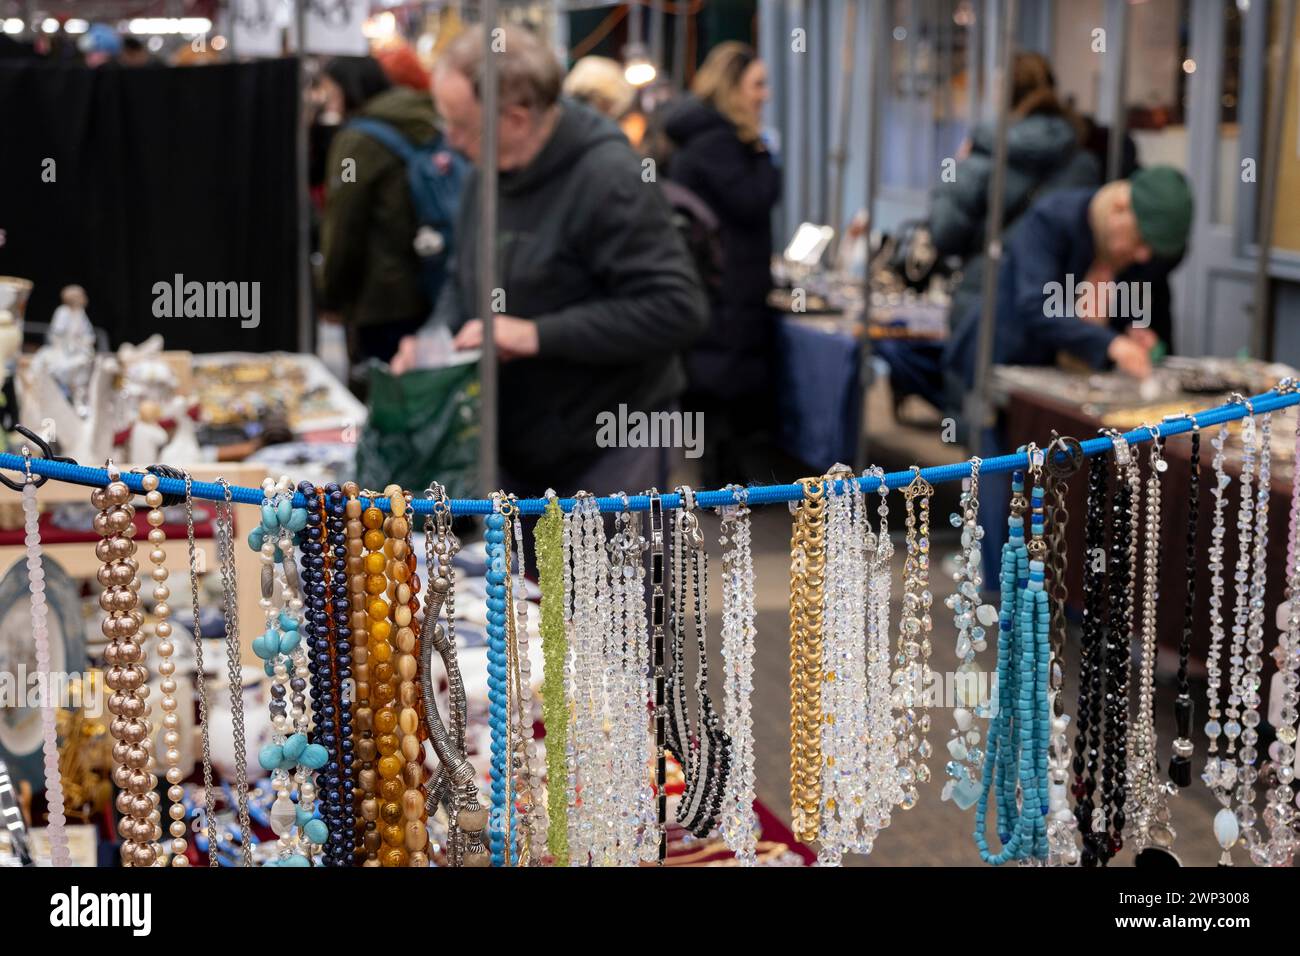 Stalls, sellers and customers perusing the jewellery for sale at Jubilee Market in Jubilee Hall, Covent Garden on 4th March 2024 in London, United Kingdom. Jubilee Market is a covered area in Covent Garden Piazza which is a big draw for tourism in the West End. On Mondays the market specialises in antiques and collectables. Stock Photo